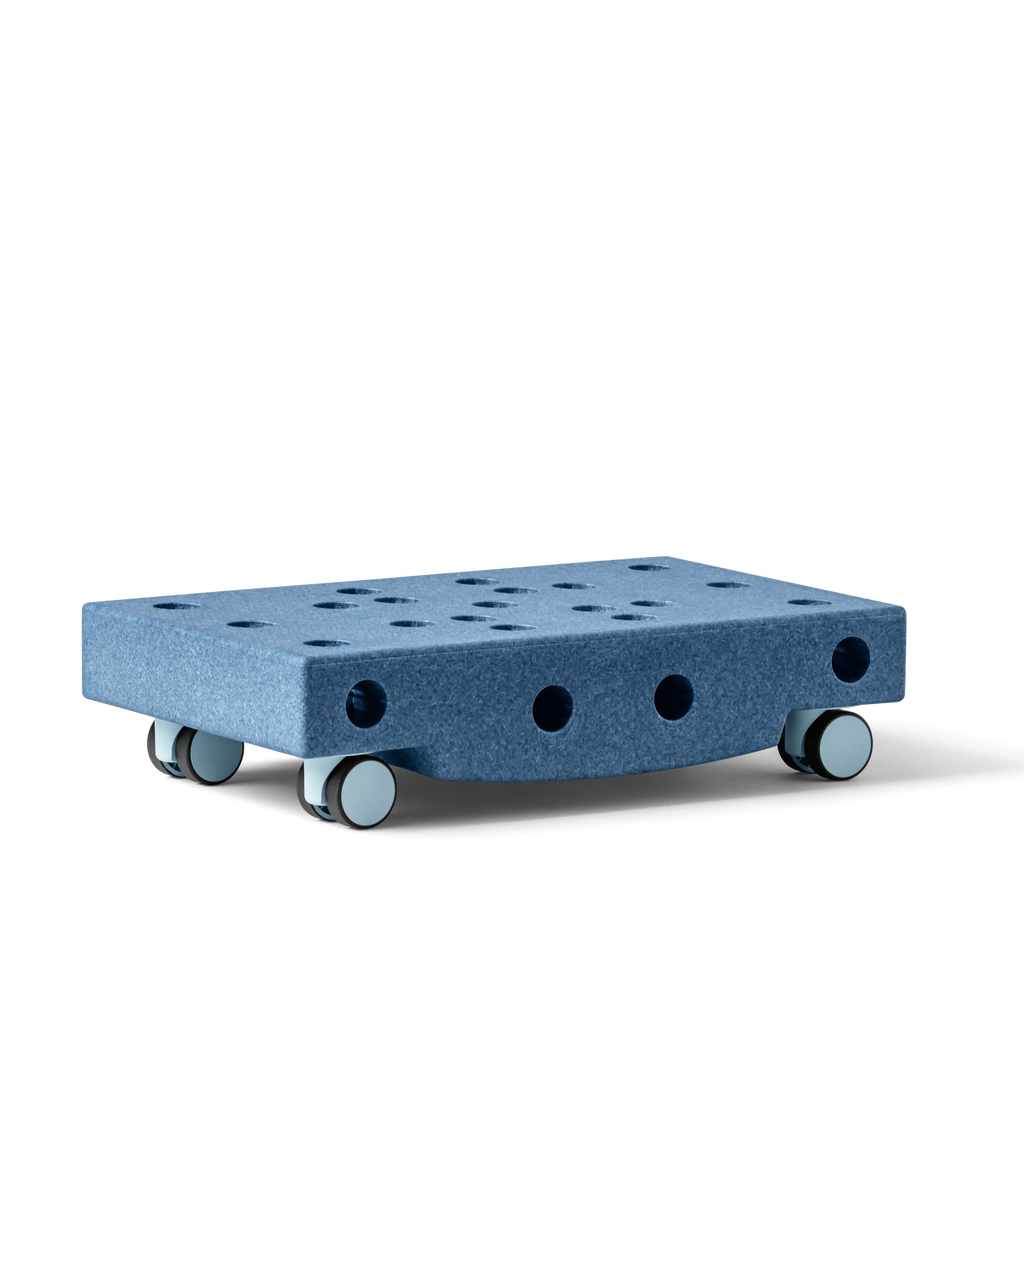 MODU Scooter Board in Deep Blue Sky Blue. Encourages motor skill development. Use for tummy time or as a balance board.